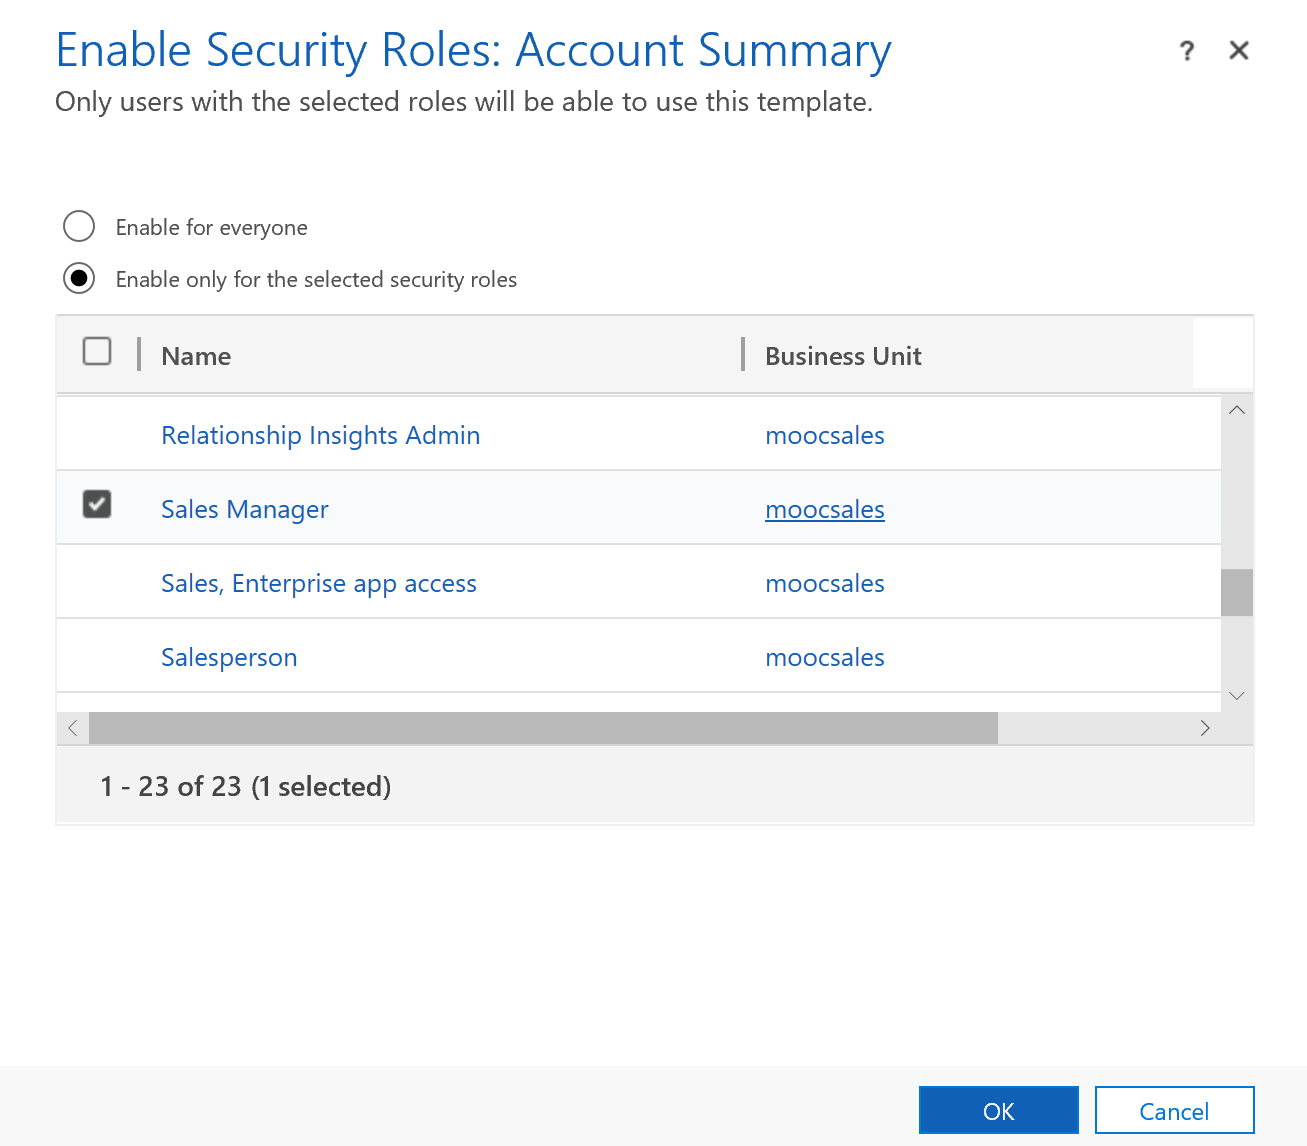 Screenshot showing a view to select security role for enablement